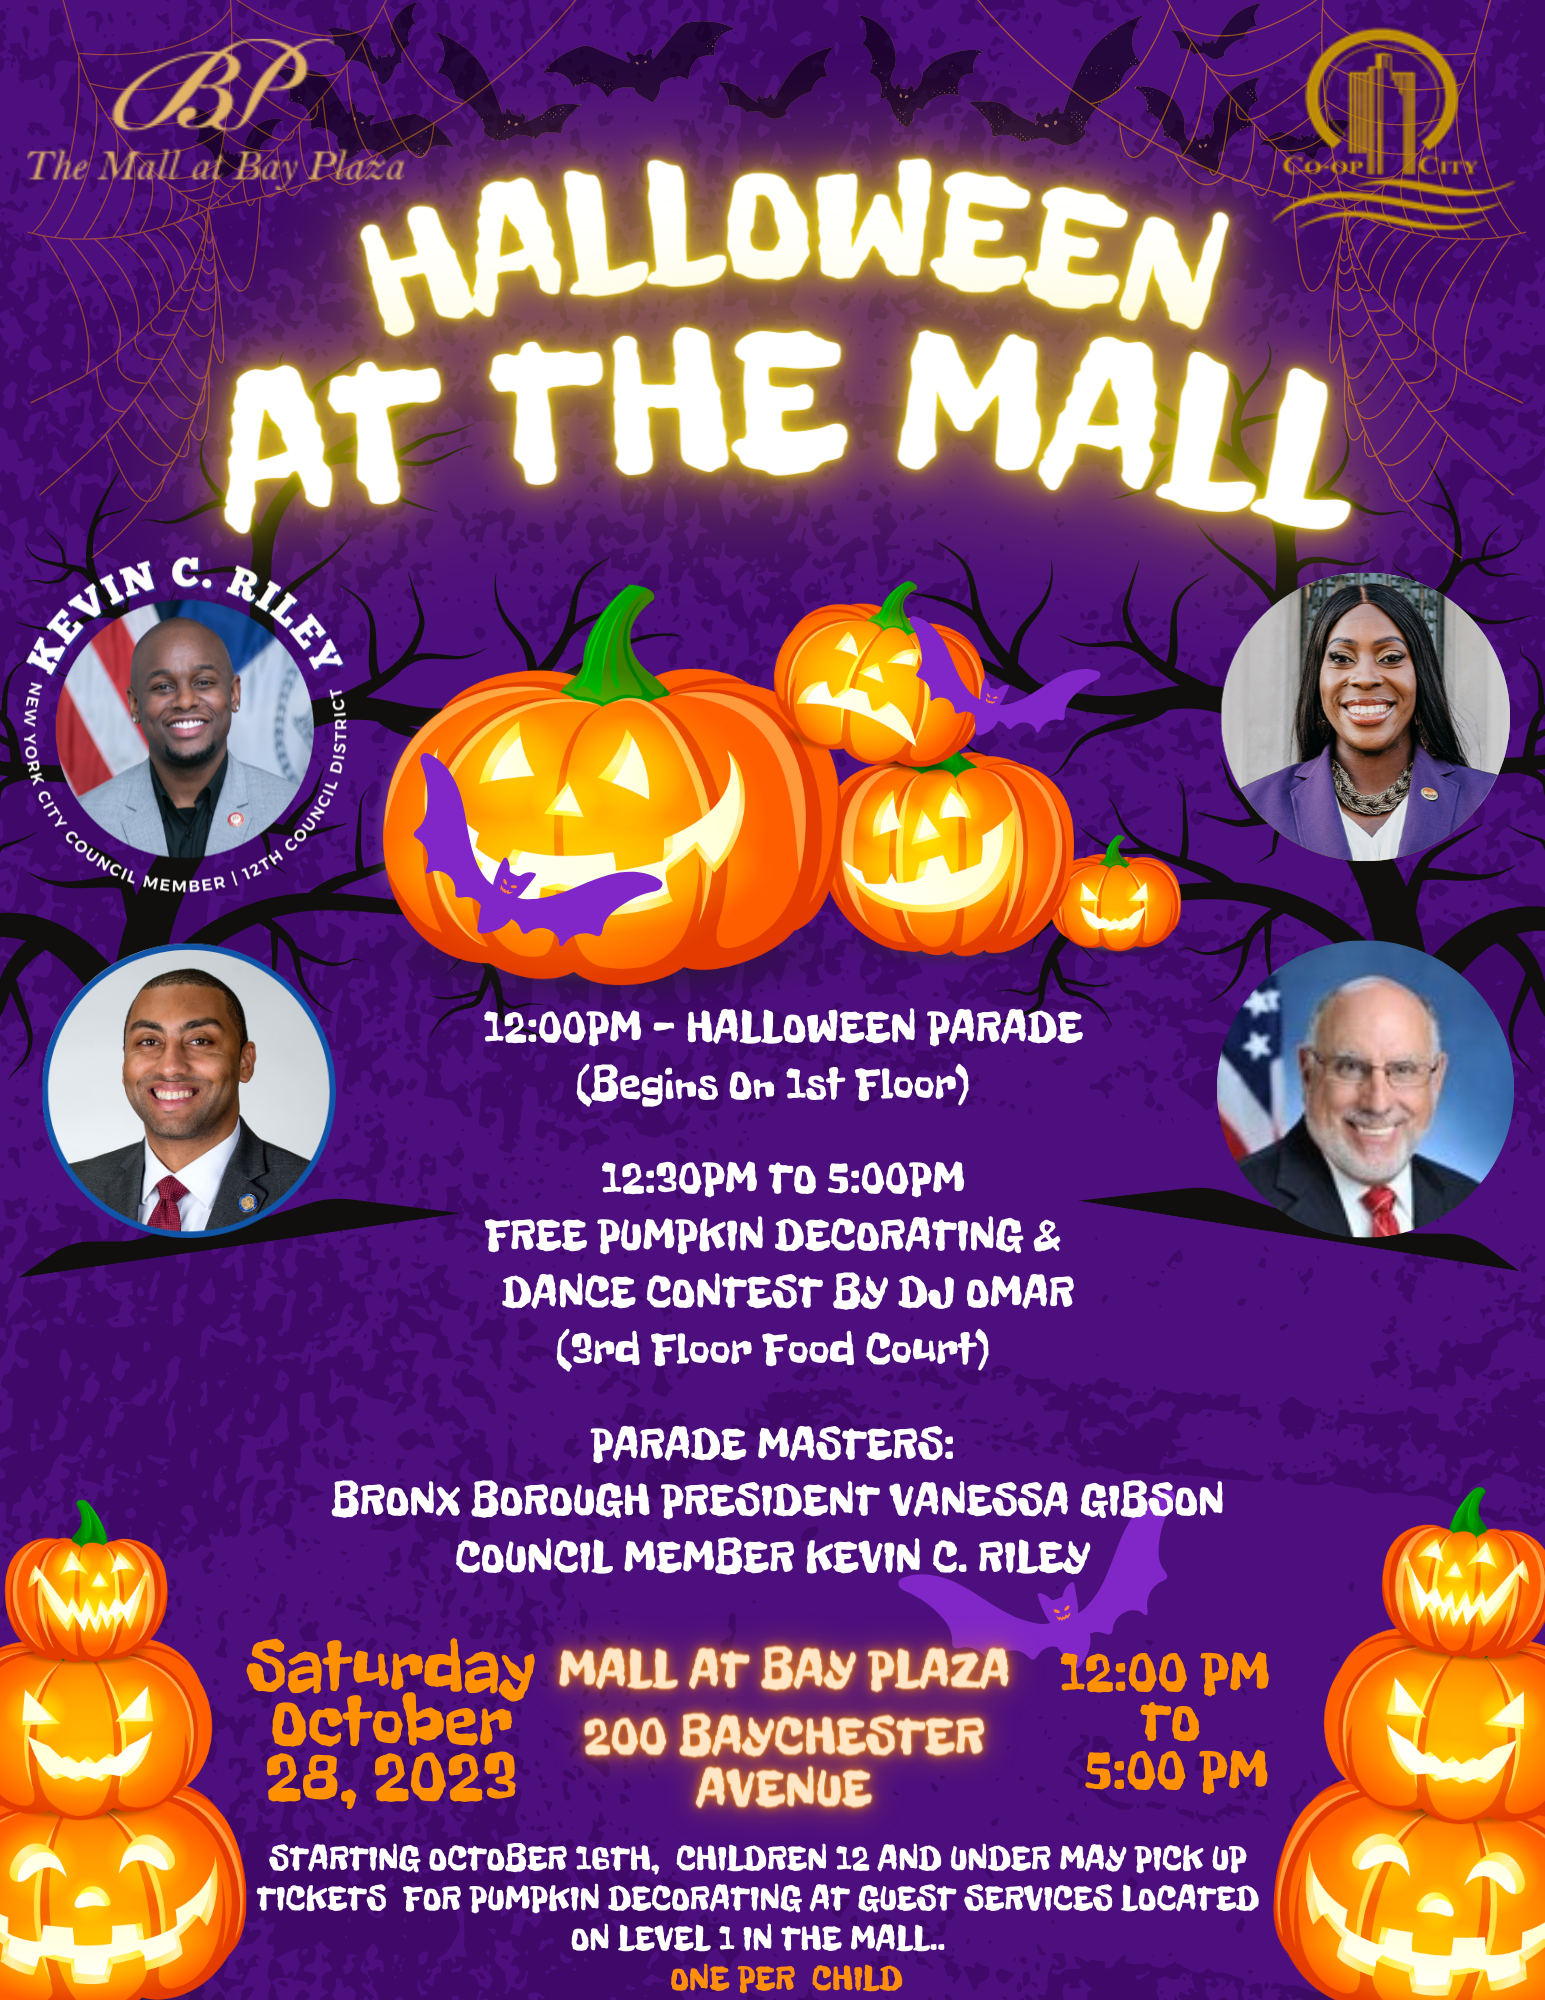 A flyer for the Halloween Parade at the Mall event on October 28, 2023 from 12 PM to 5 PM.